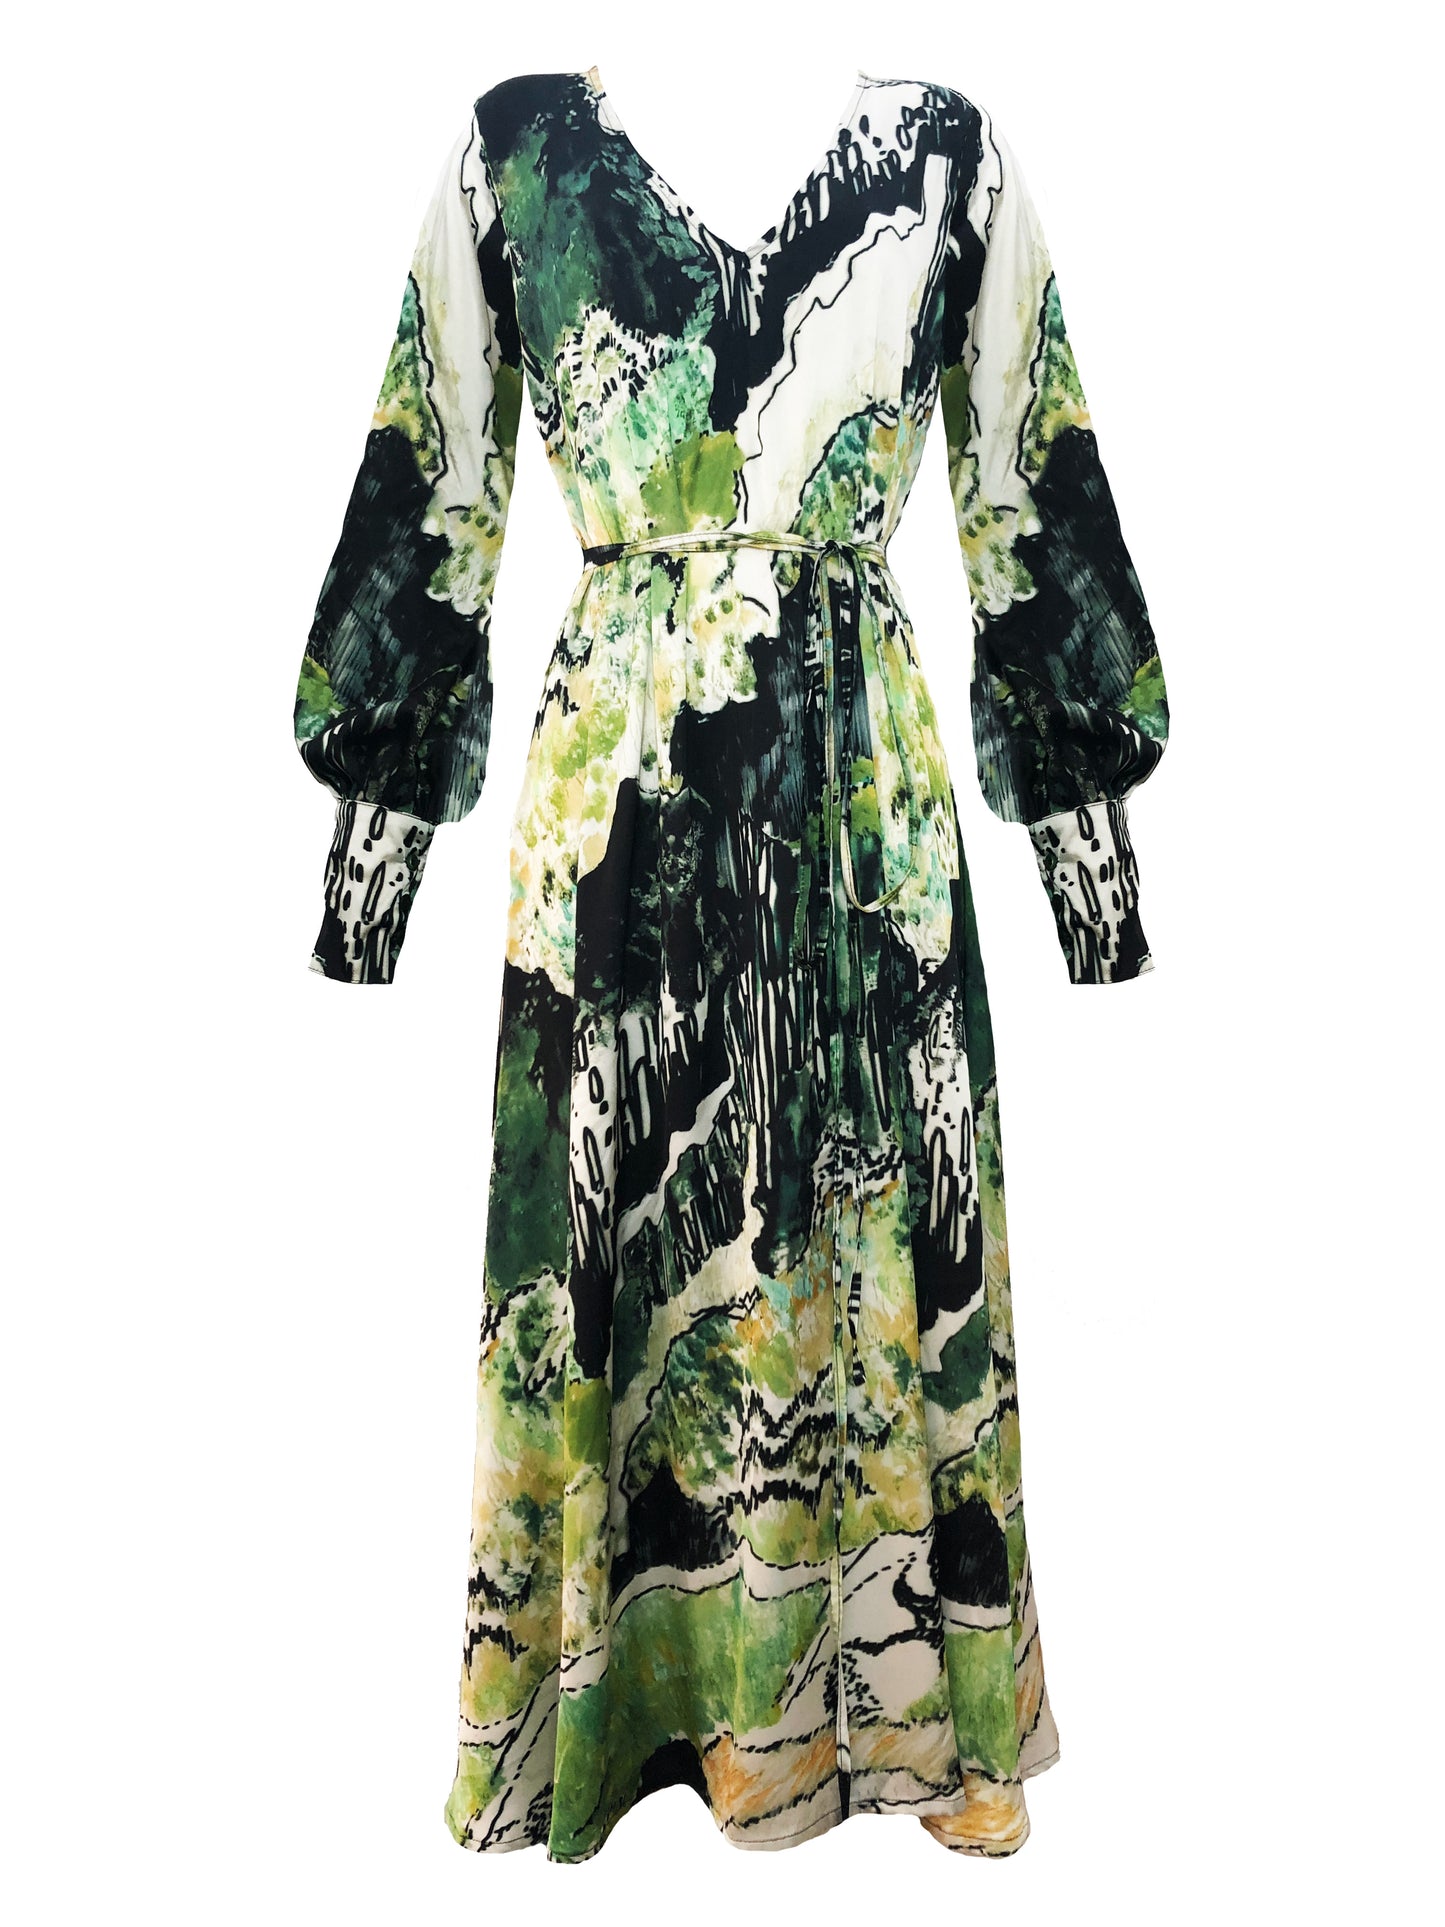 The Allure Dress in Landscape